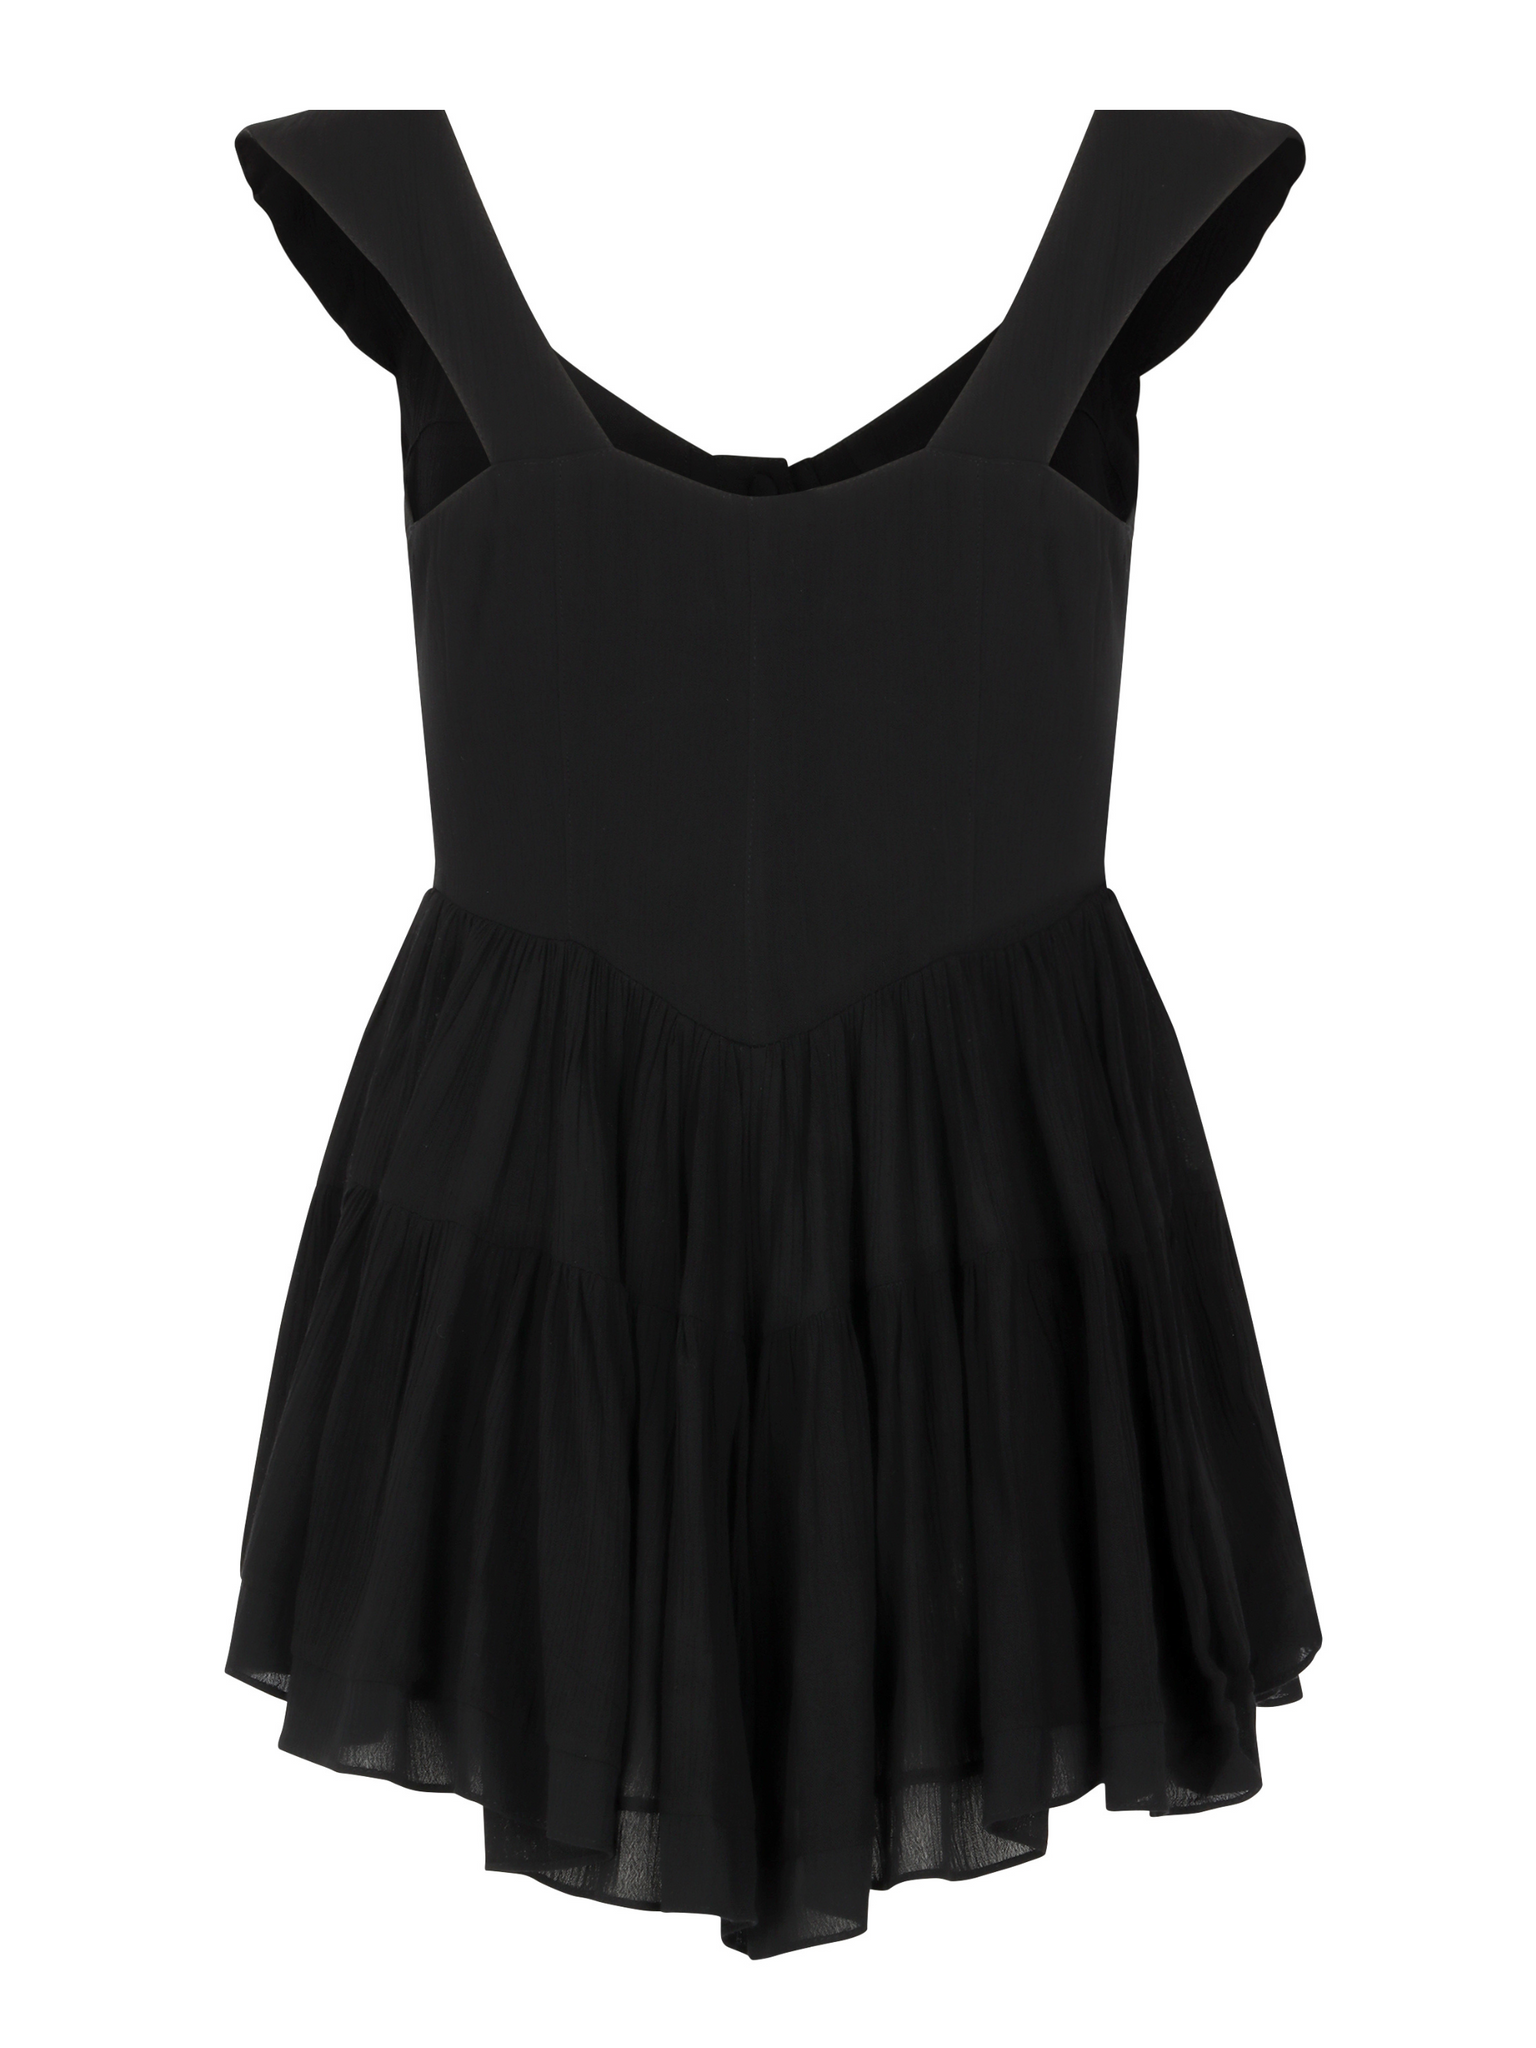 Vanessa Mooney - Good news Sunday! Finally the Black Elisabeth Dress is  back in stock! Limited and lovely!